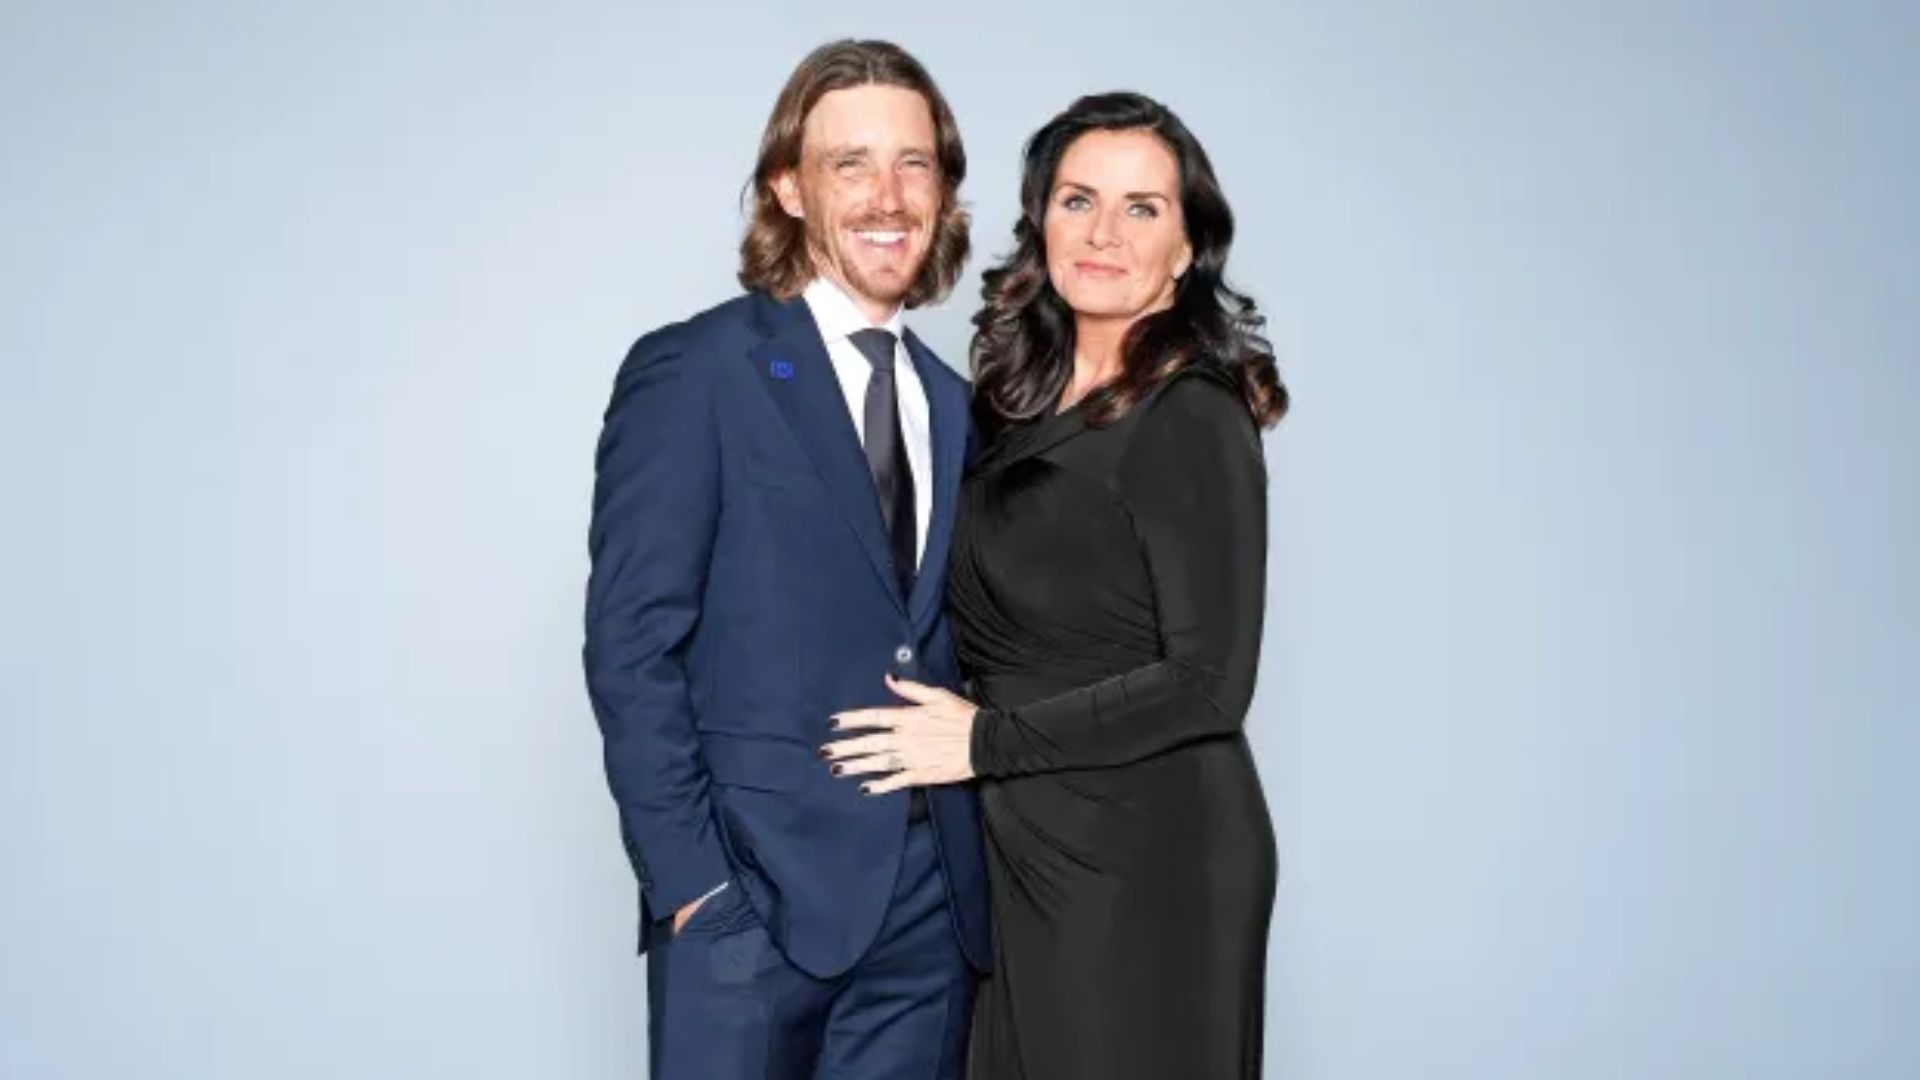 All You Need To Know About Tommy Fleetwood's Wife